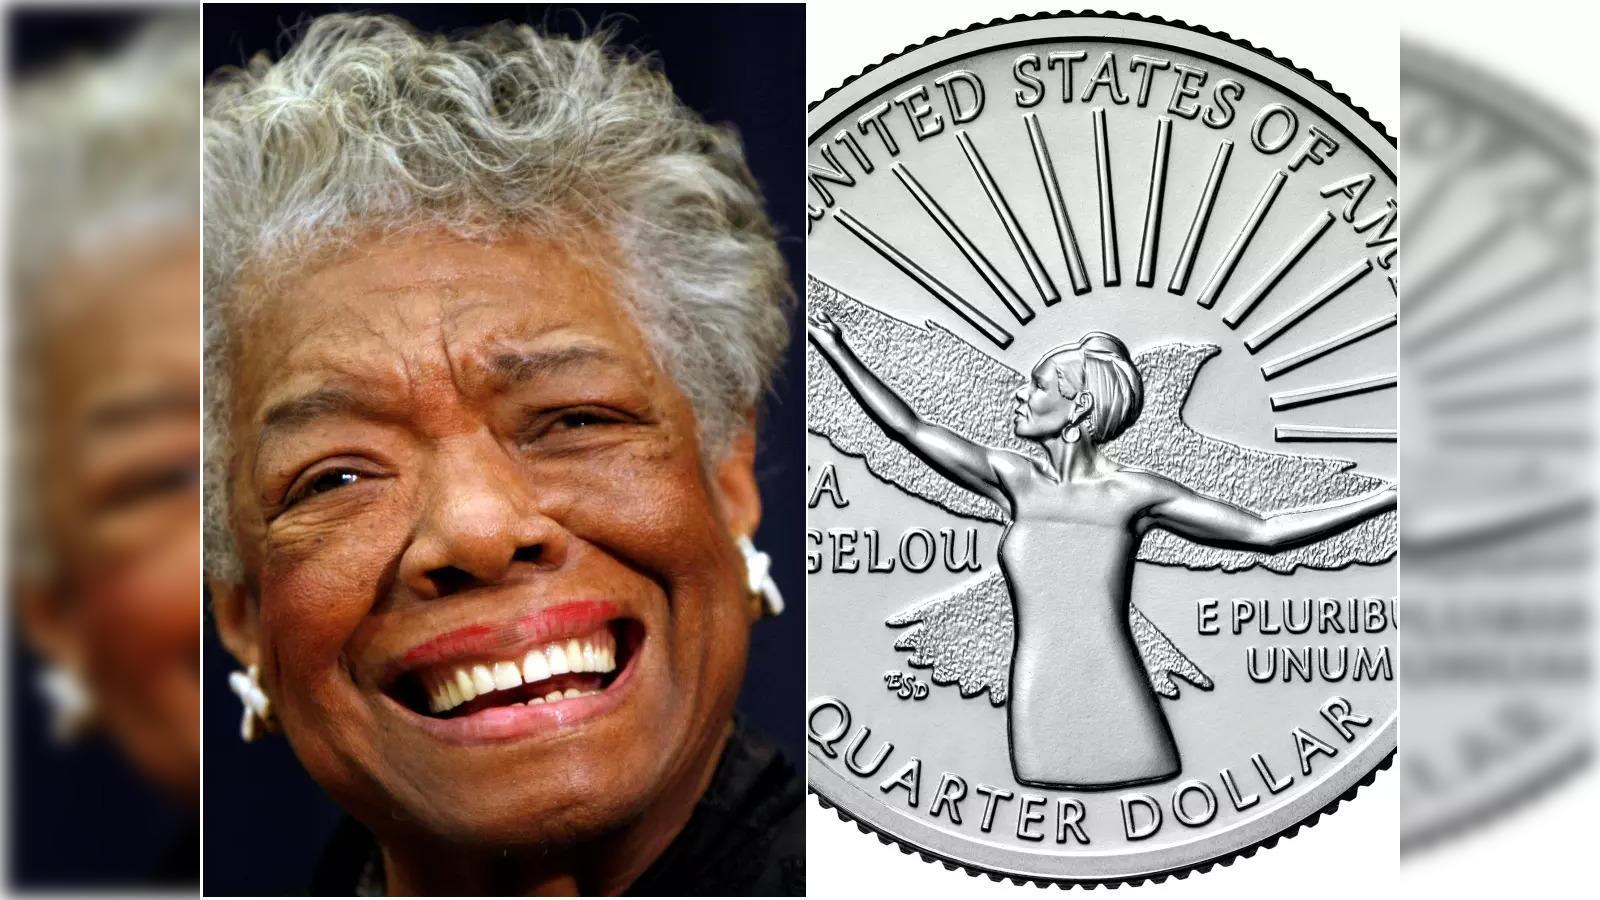 Poet and activist Maya Angelou creates history, becomes first